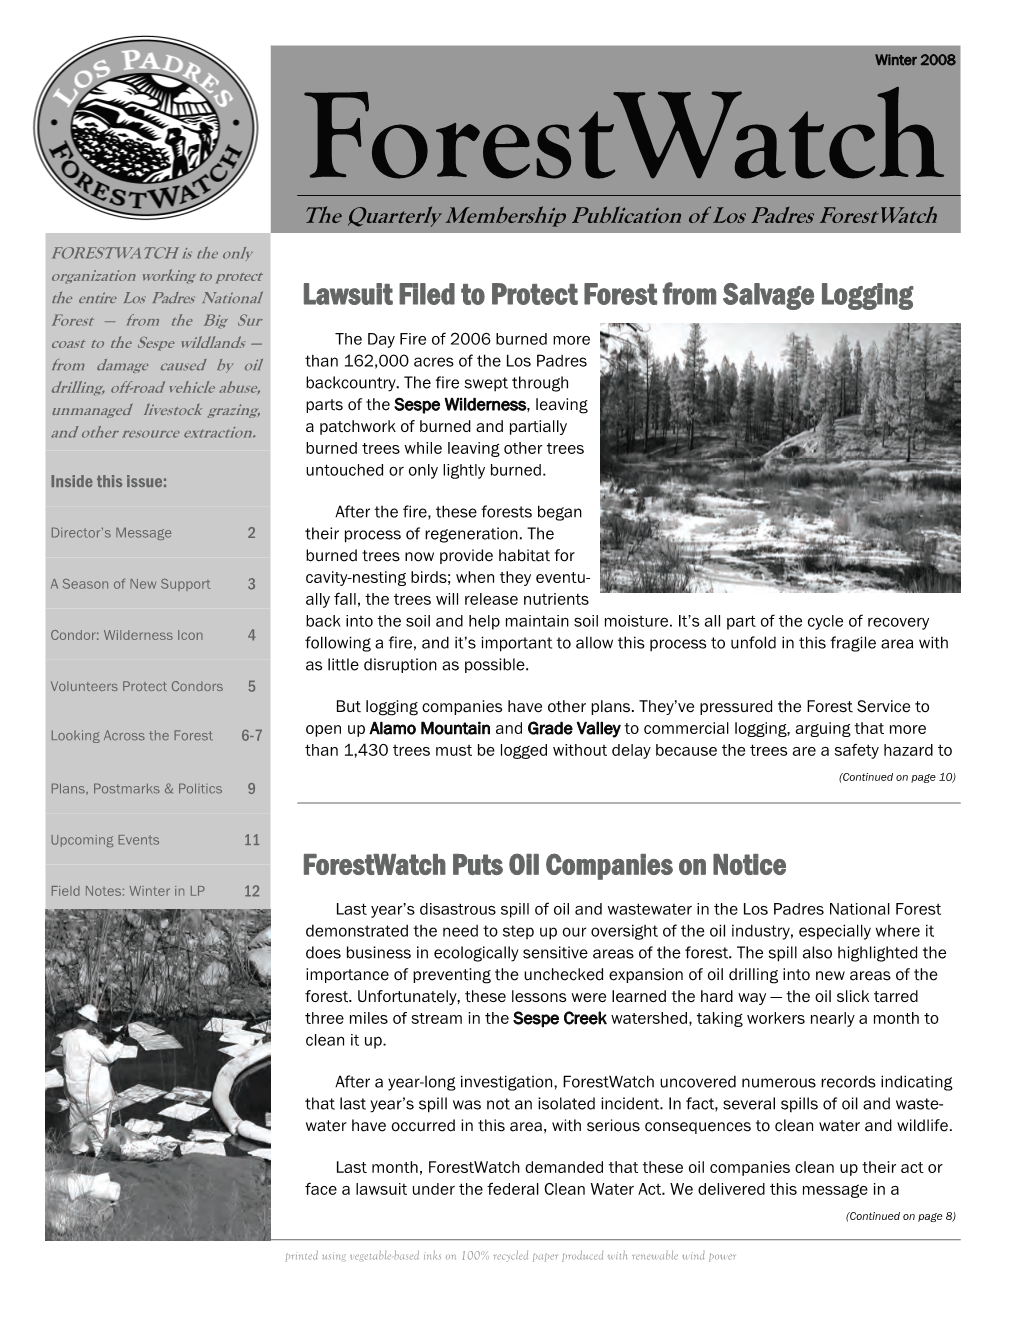 Winter 2008 Forestwatch the Quarterly Membership Publication of Los Padres Forestwatch